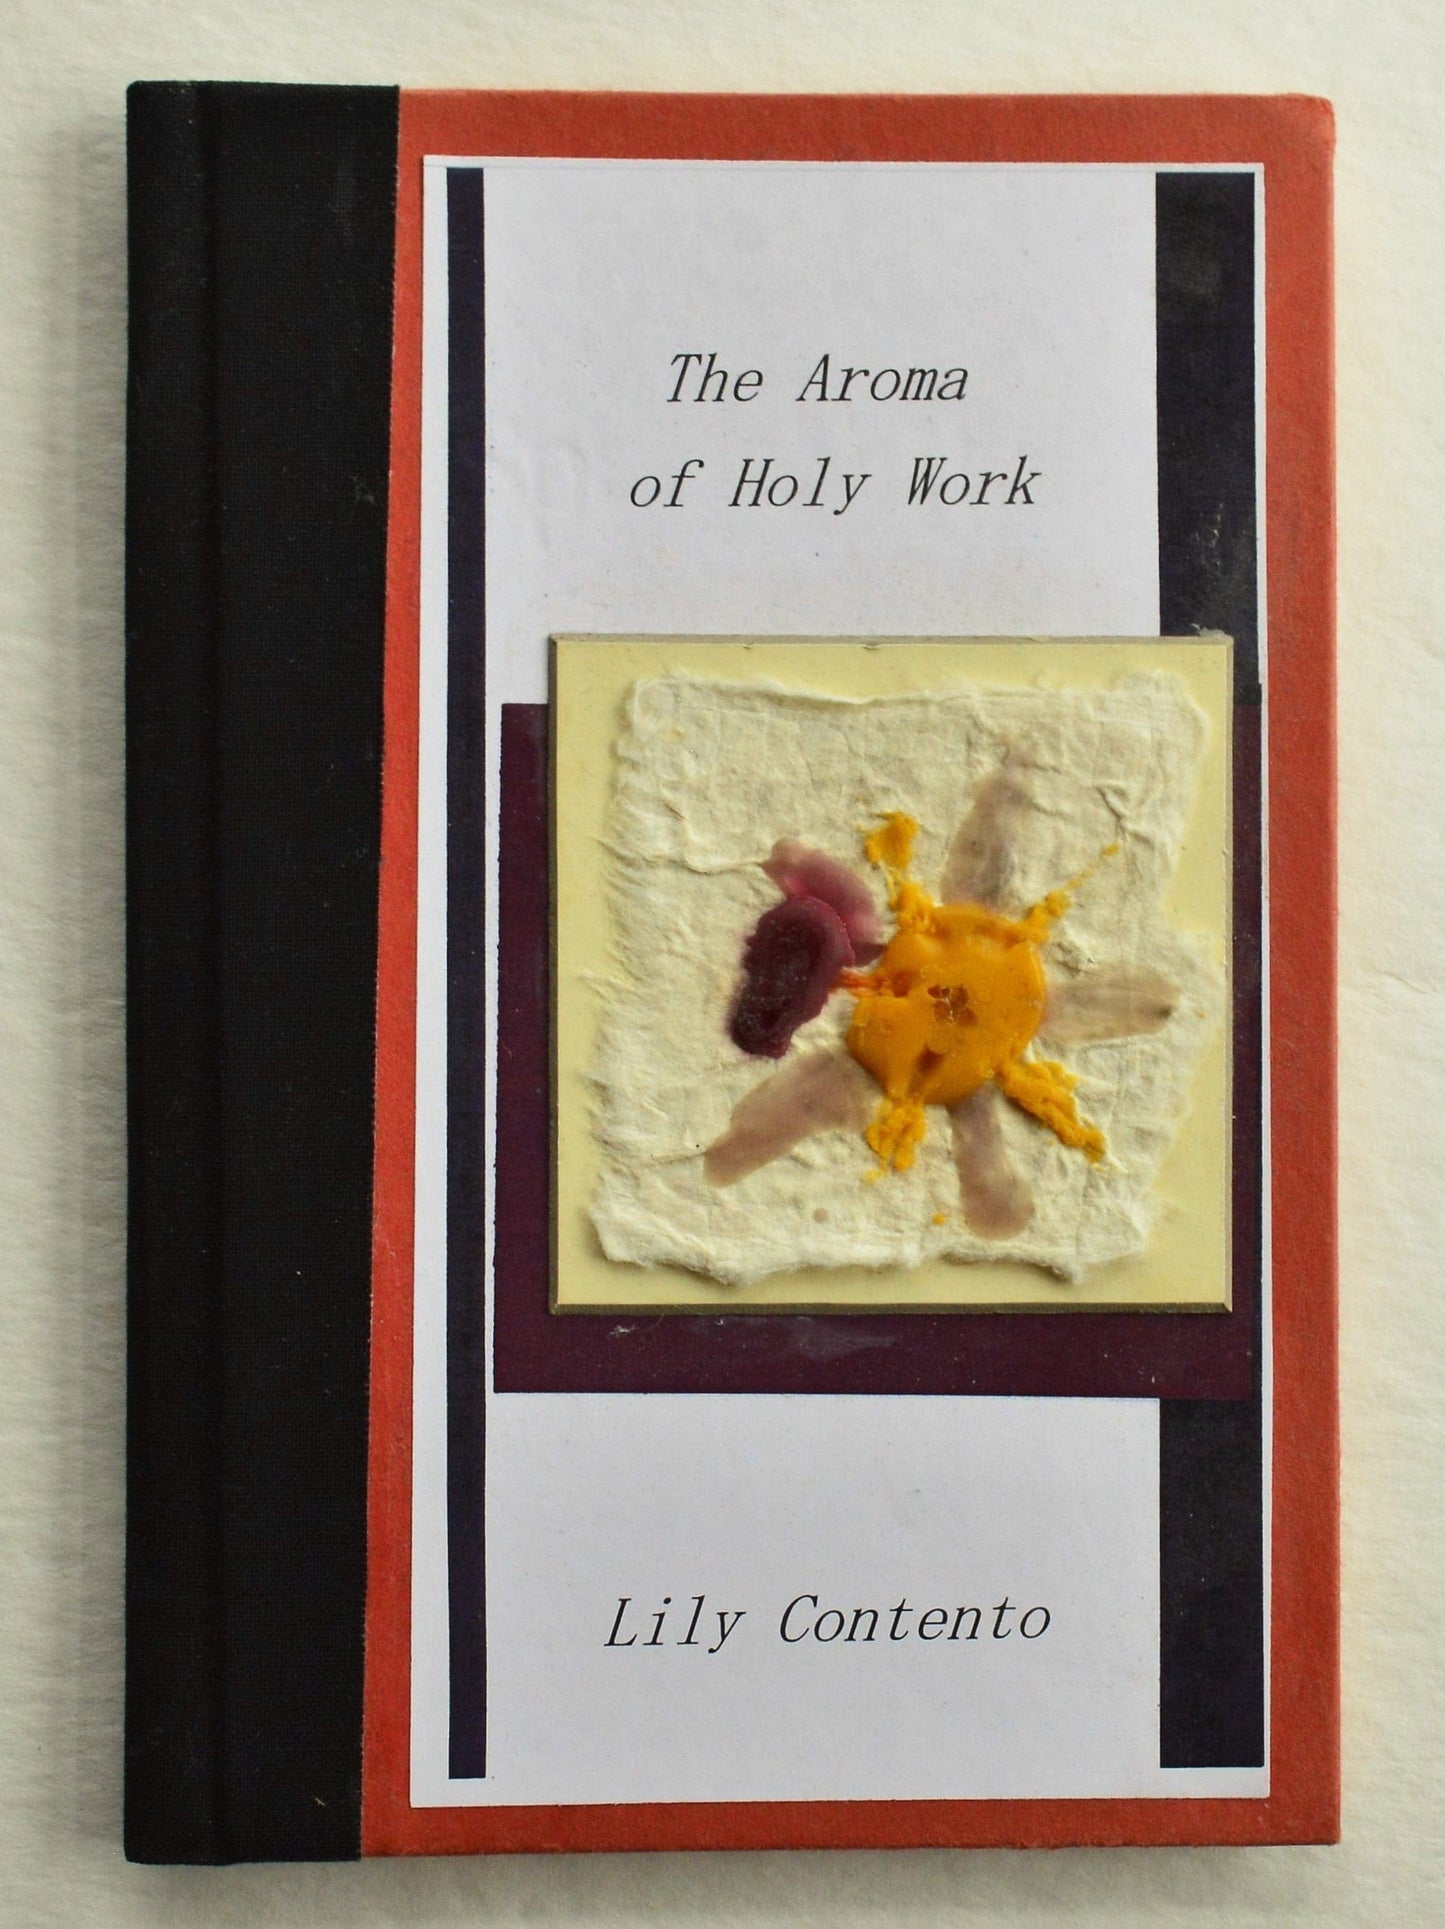 The Aroma of Holy Work - Lily Contento